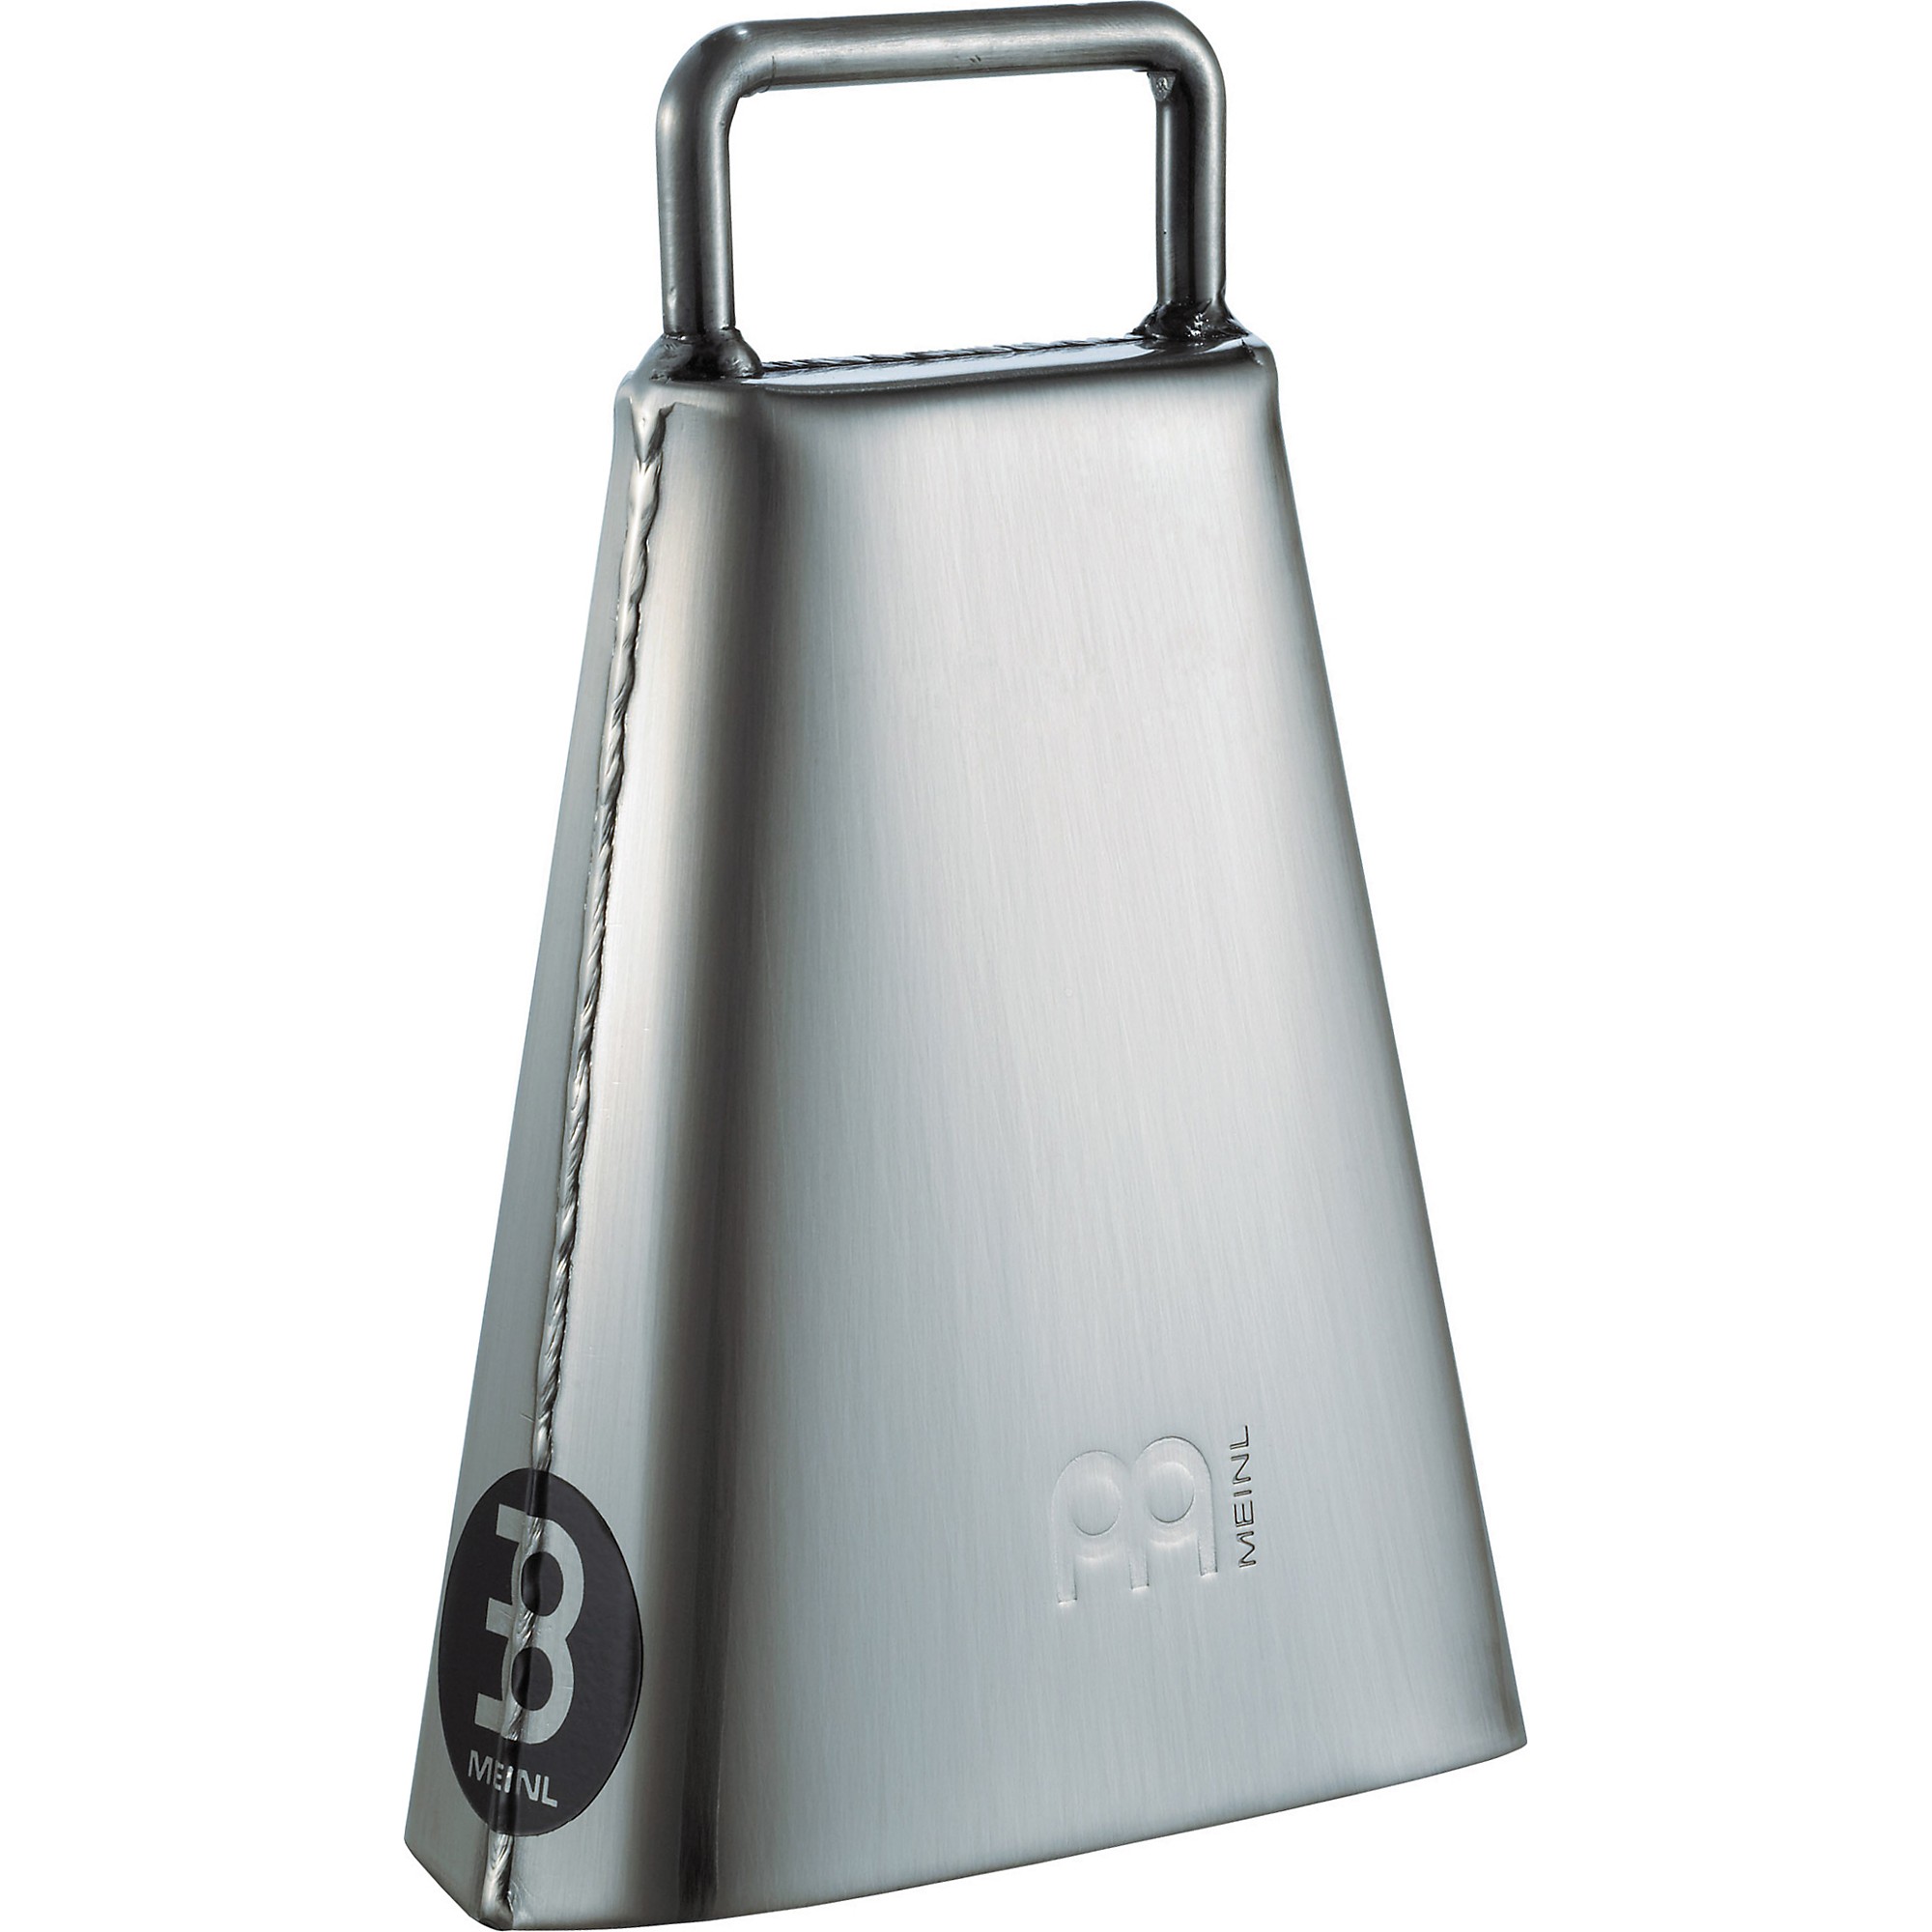 Handheld Cowbell + Bag. Colombian Percussion, Polished Chrome High